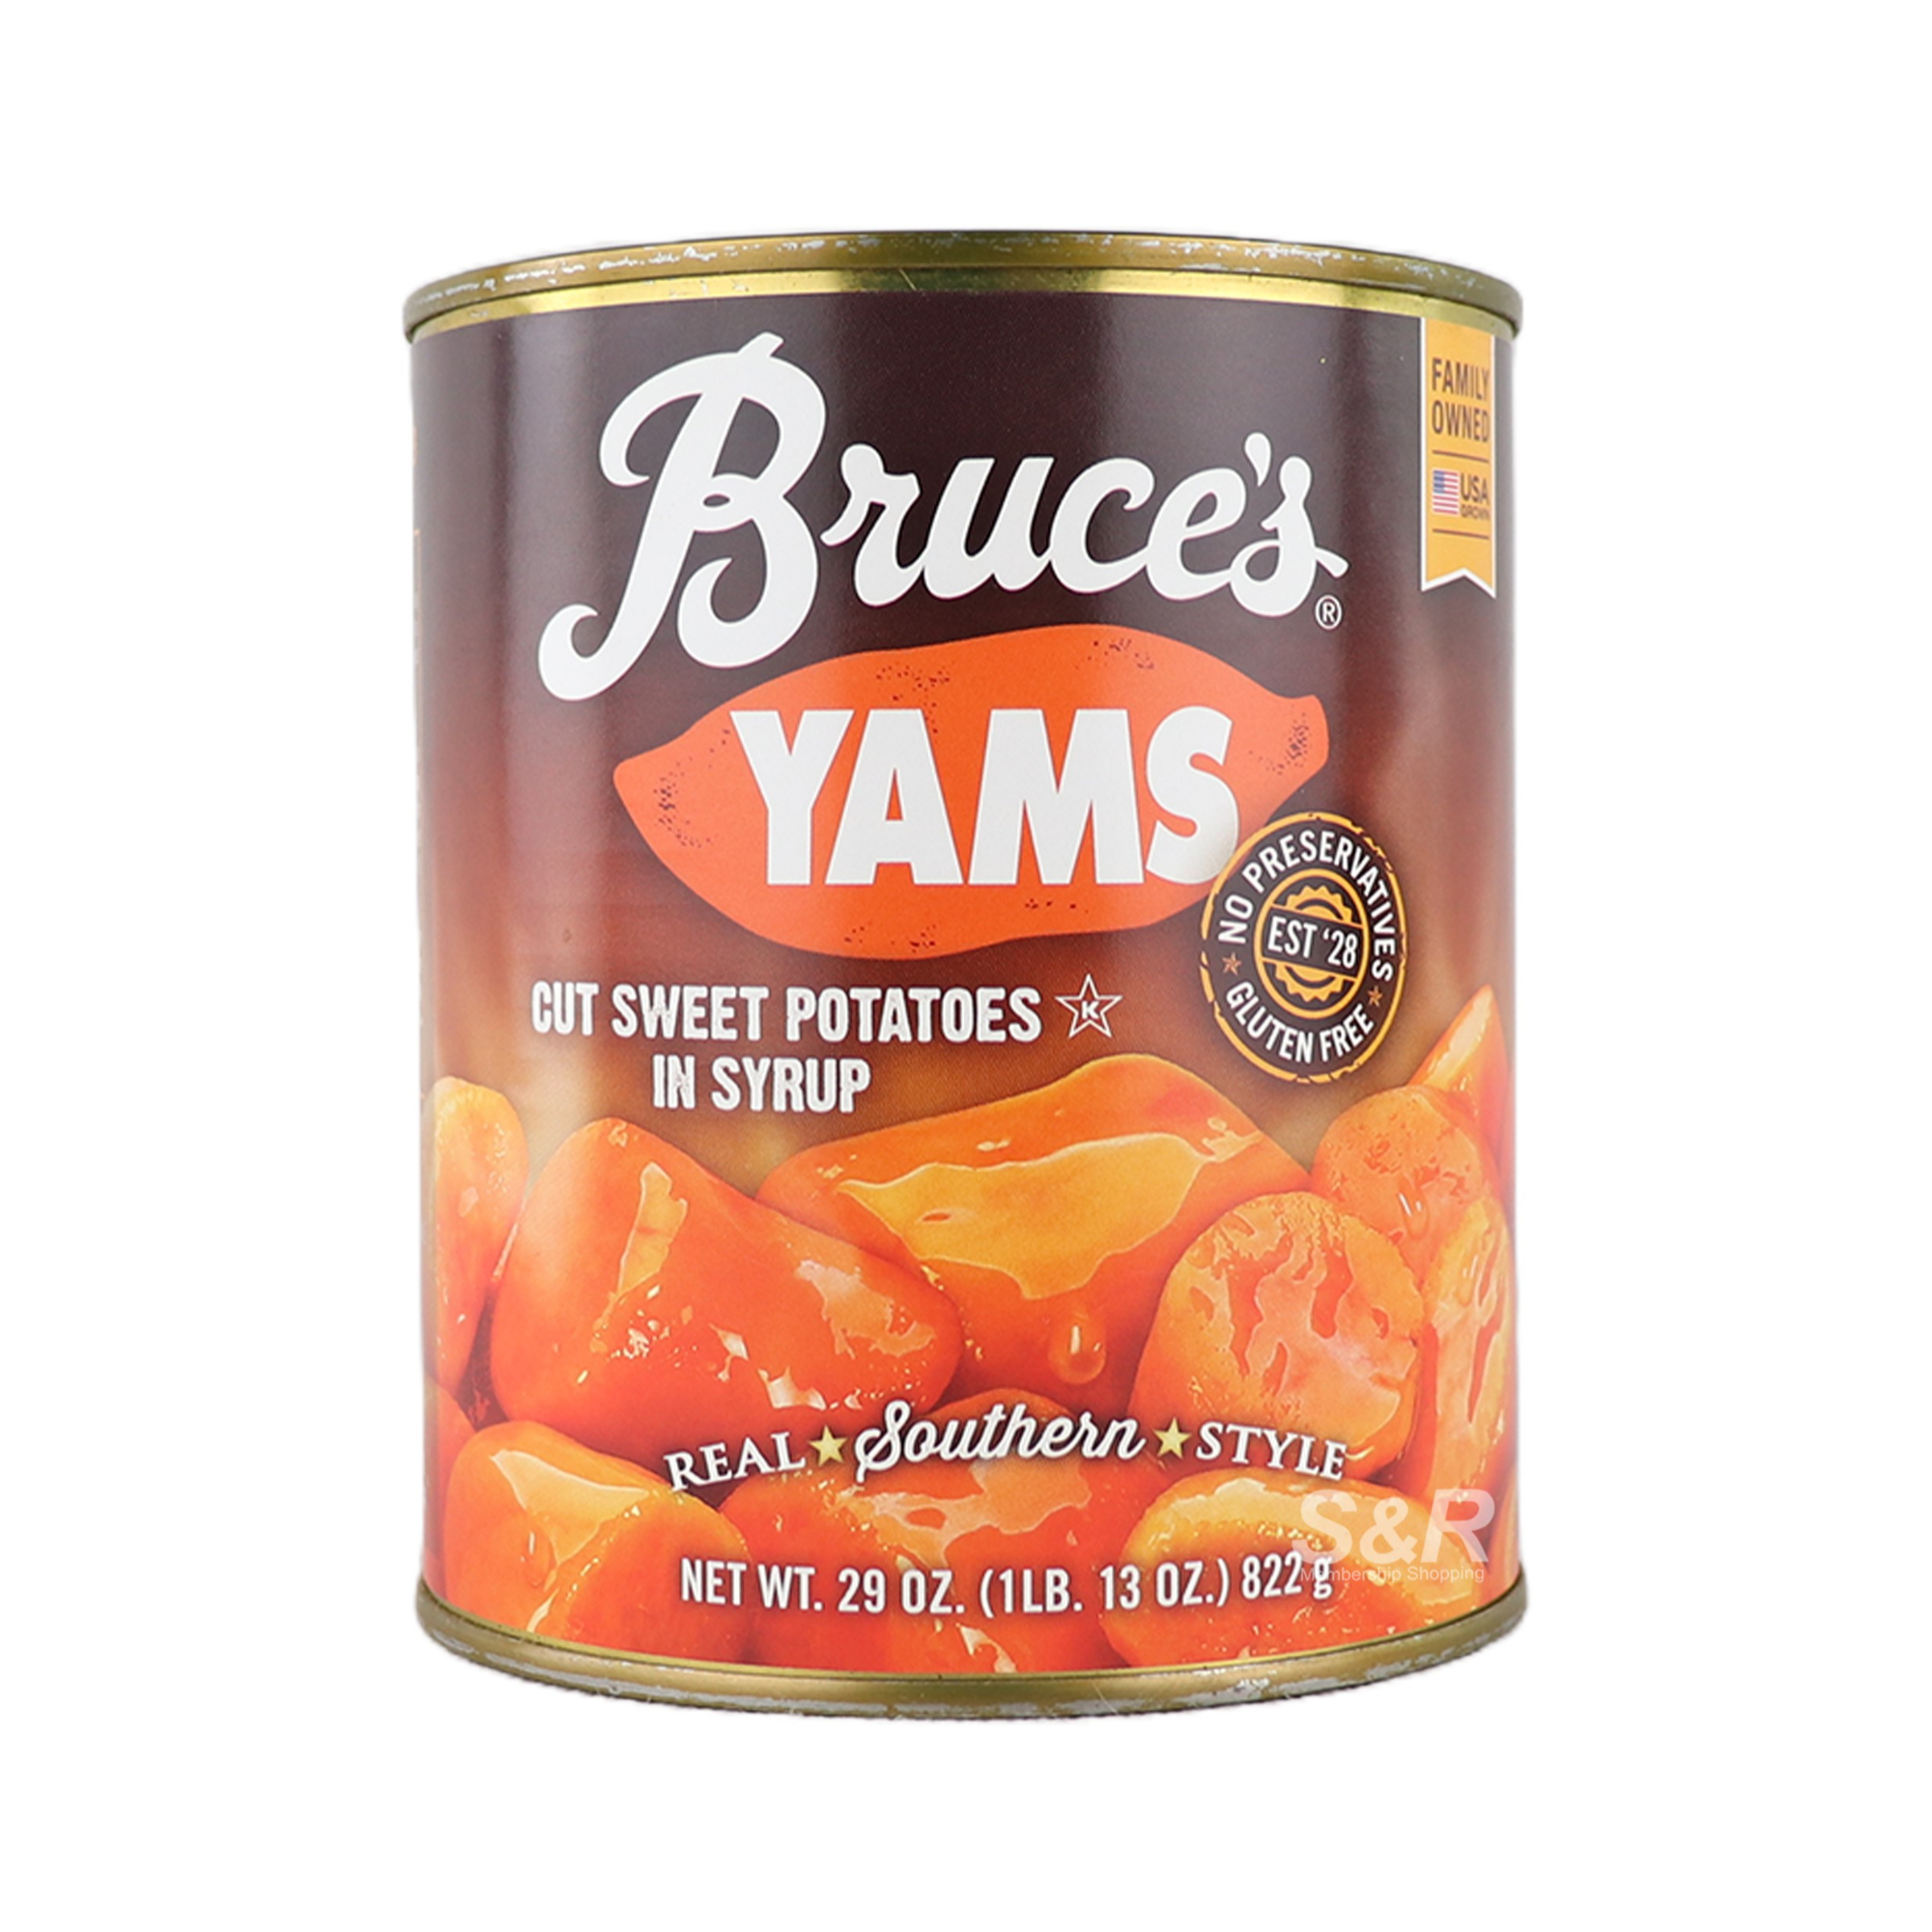 Bruce's Yams Cut Sweet Potatoes in Syrup 822g